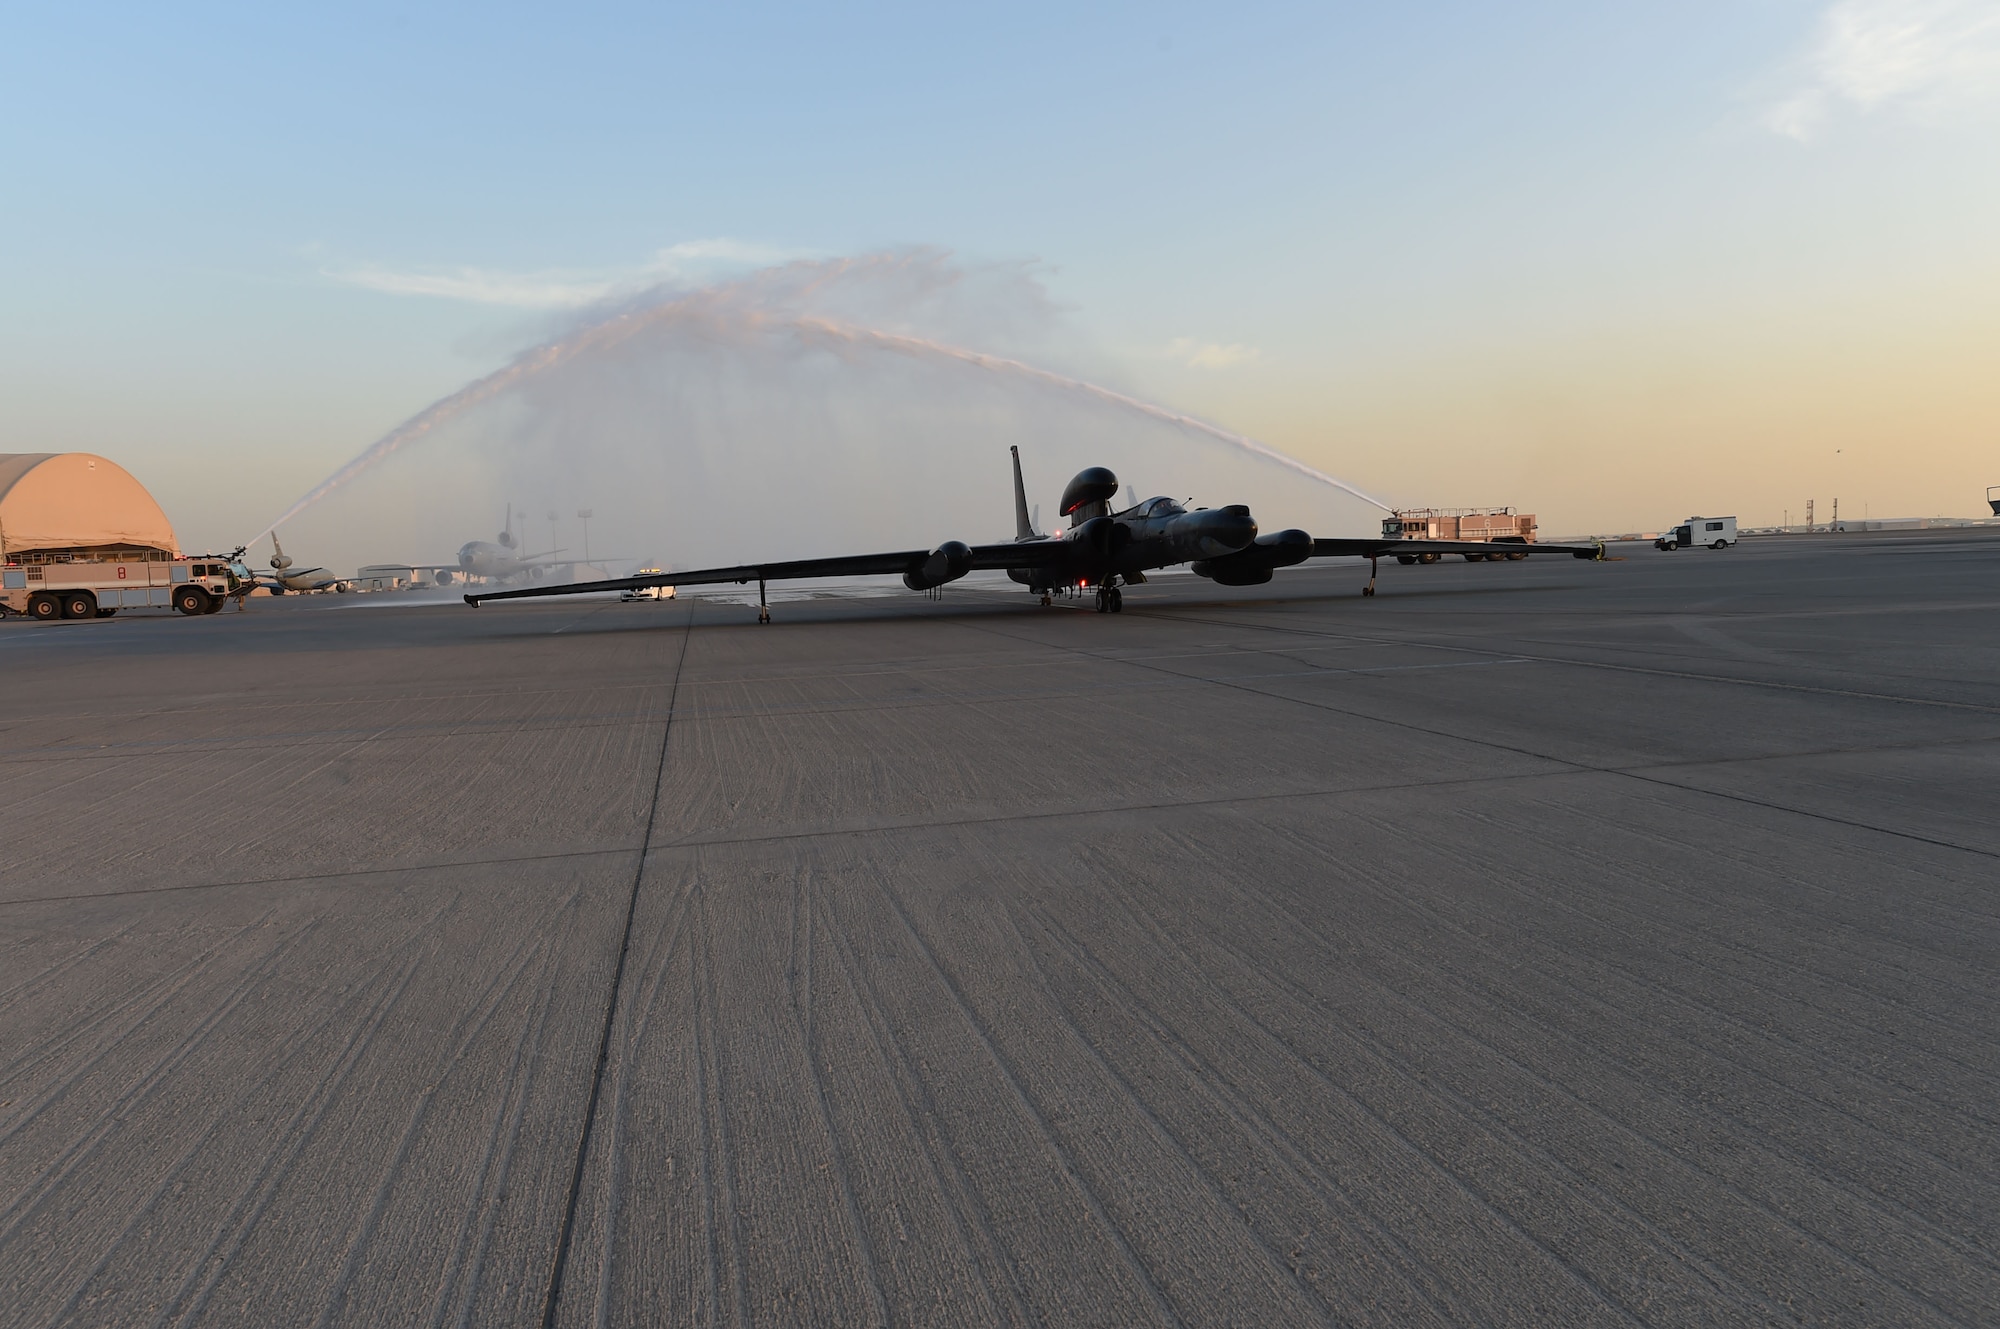 A U-2, flying from the 380th Air Expeditionary Wing at an undisclosed location in Southwest Asia, approaches the maintenance hangar after the final sortie for one of its mission systems, Dec. 15, 2016. The final flight is celebrated with a traditional shower and a greeting party consisting of the crews that have maintained the now retired mission system. The retired system will be replaced with one that is currently flown on the RQ-4, enhancing the combined products of manned and unmanned high-altitude products.  (U.S. Air Force photo by Tech. Sgt. Christopher Carwile)